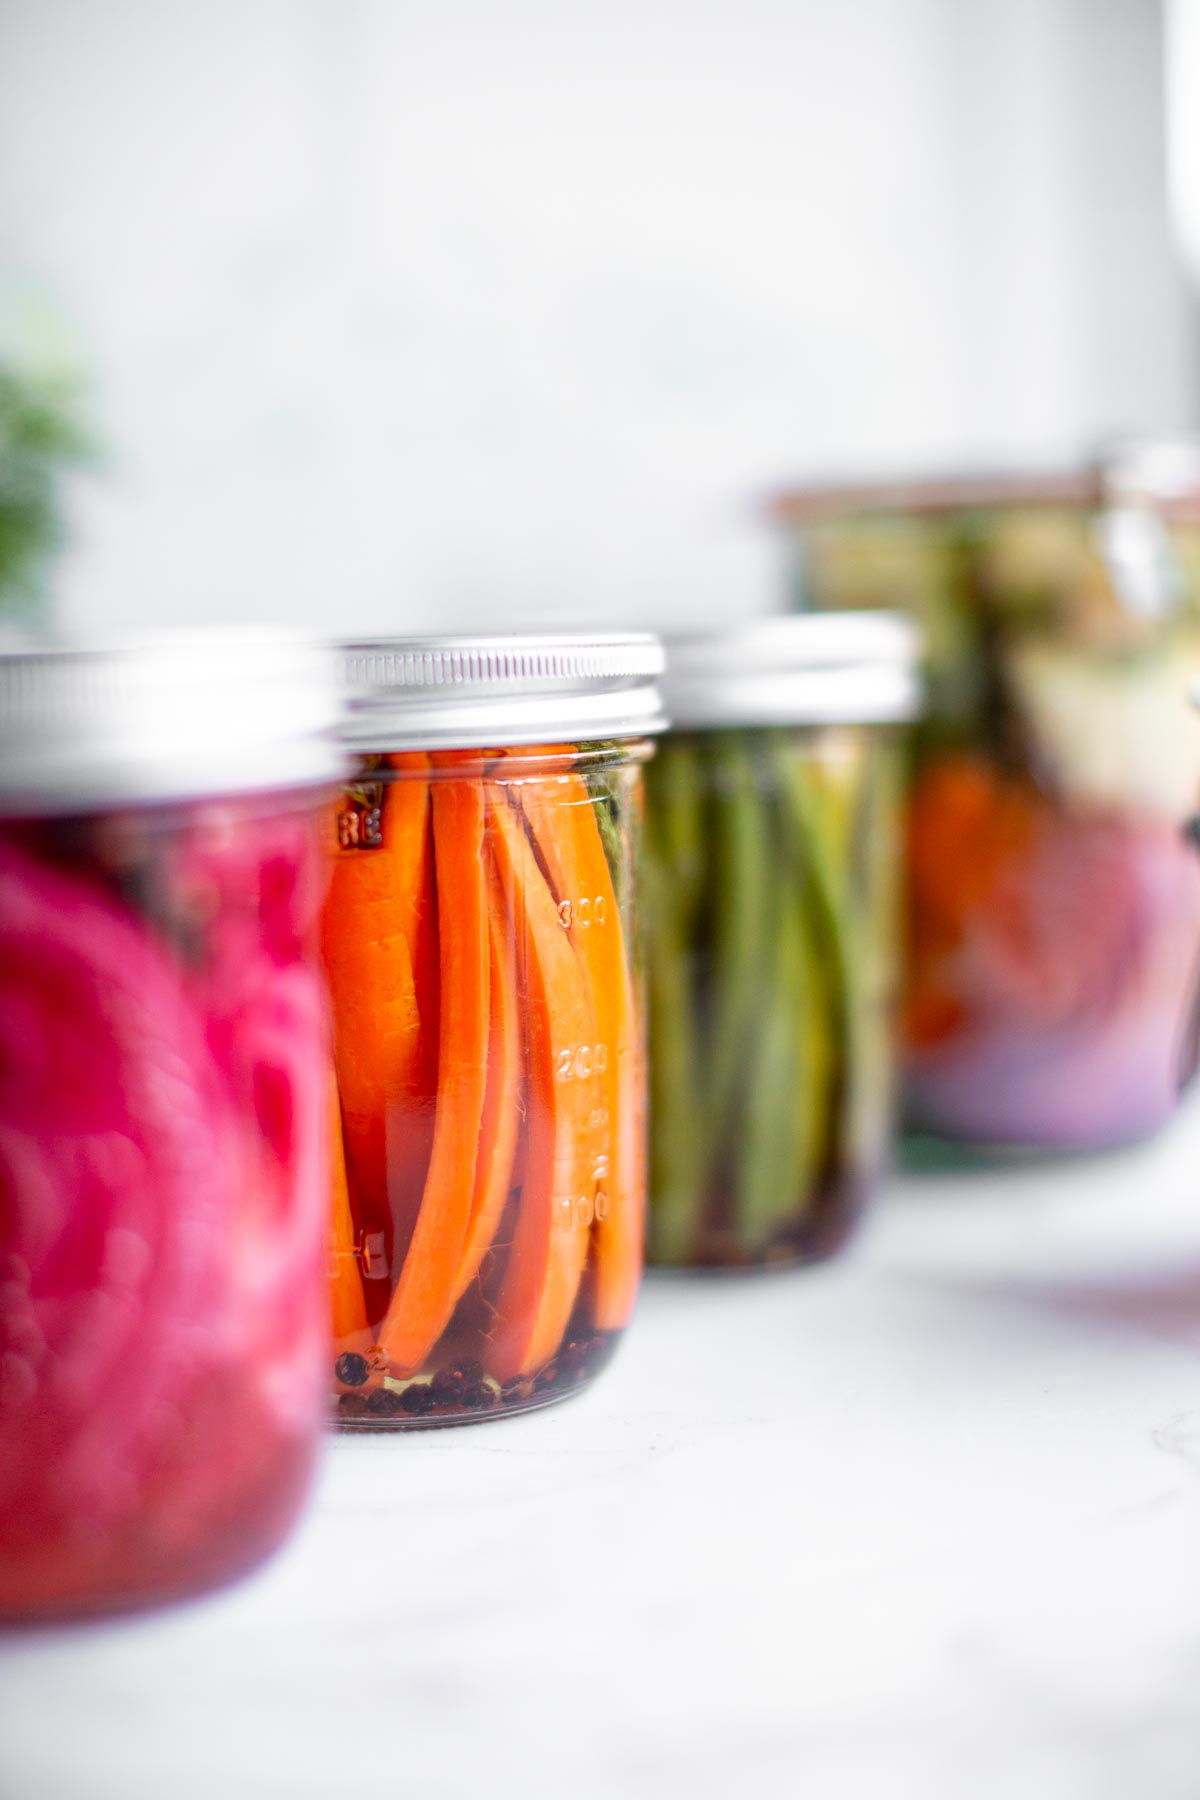 Jars of various pickled vegetables in a row.